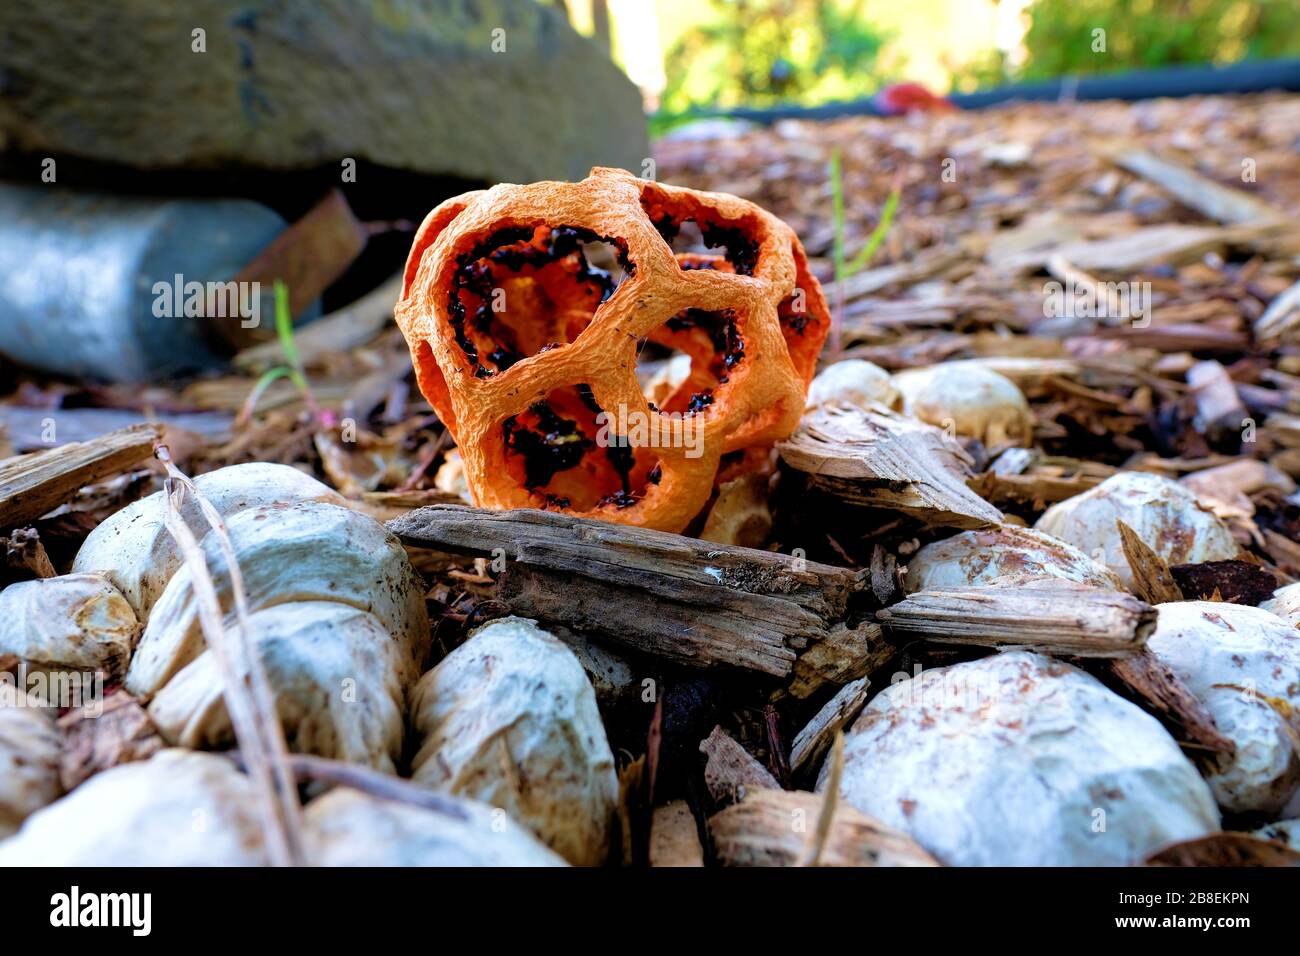 Clathrus ruber mushroom growing in mulch and rocks; red cage fungus. Stock Photo